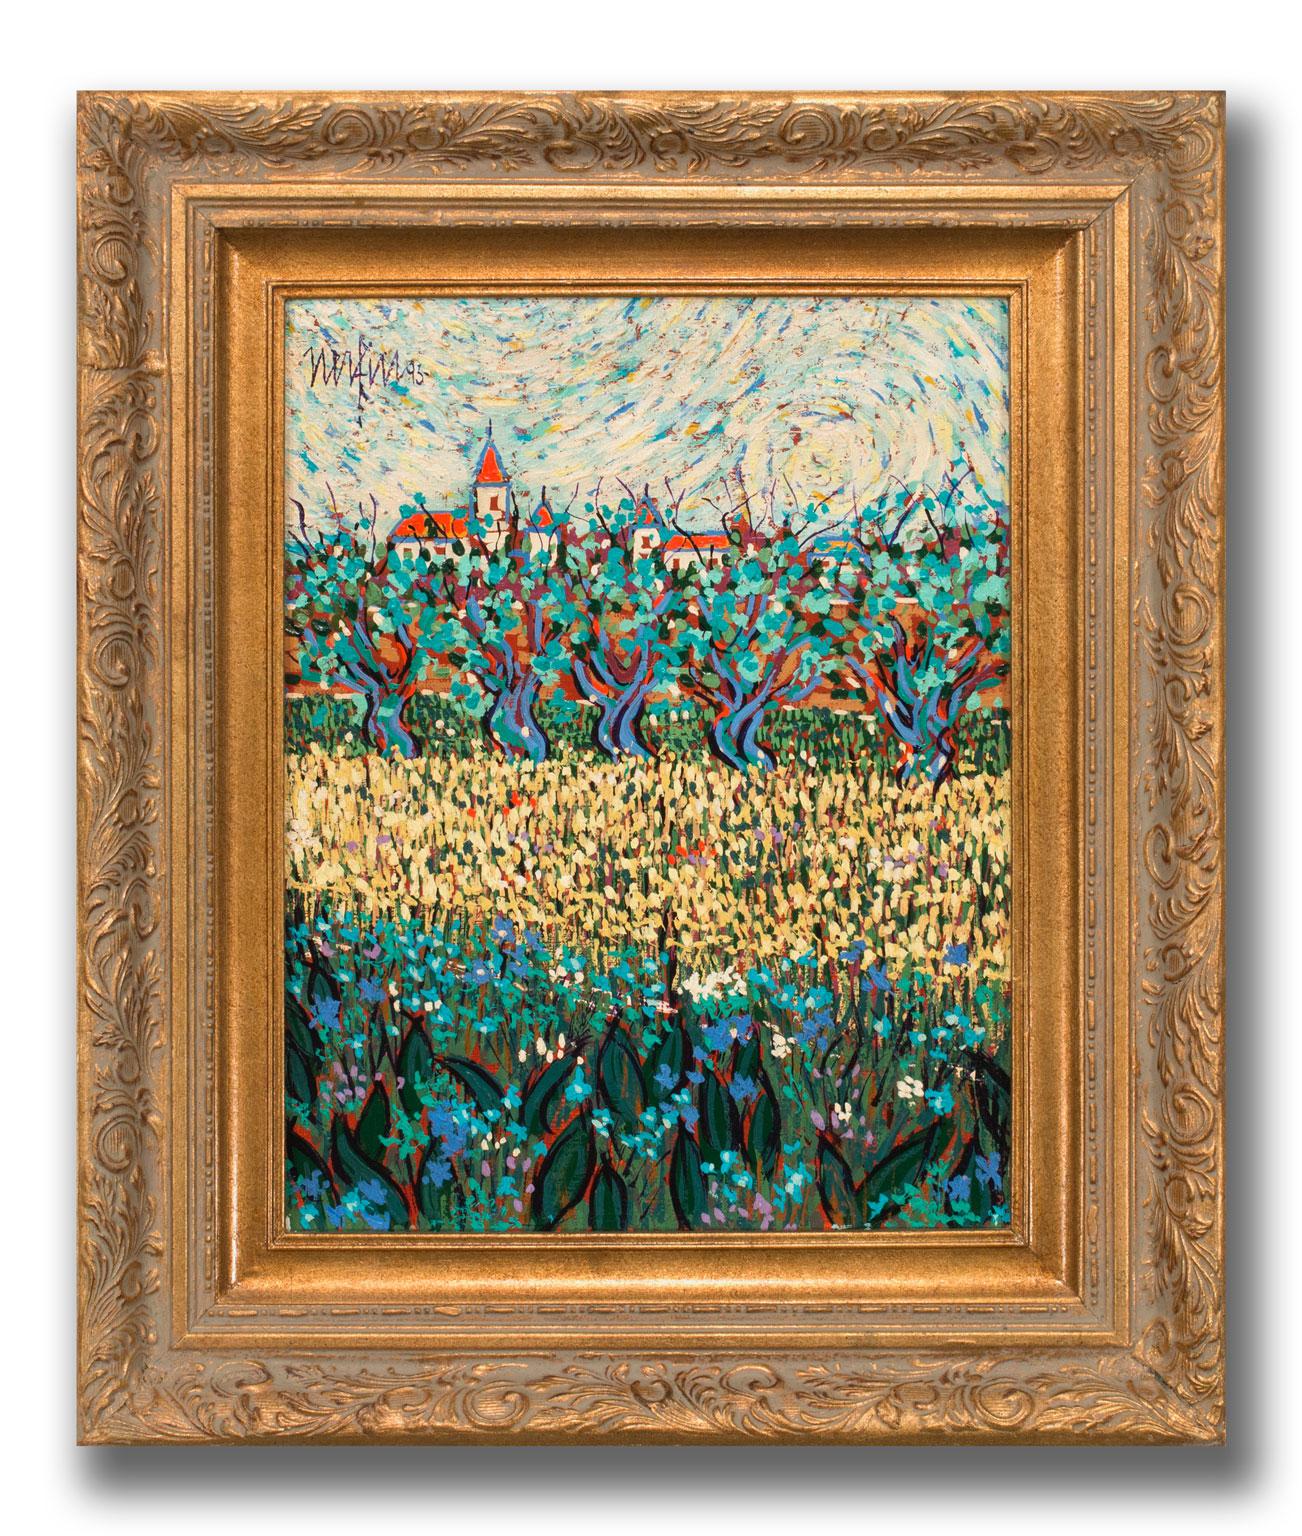 Framed Abstract Post-Impressionist Landscape Oil Painting by Jean Nerfin 1